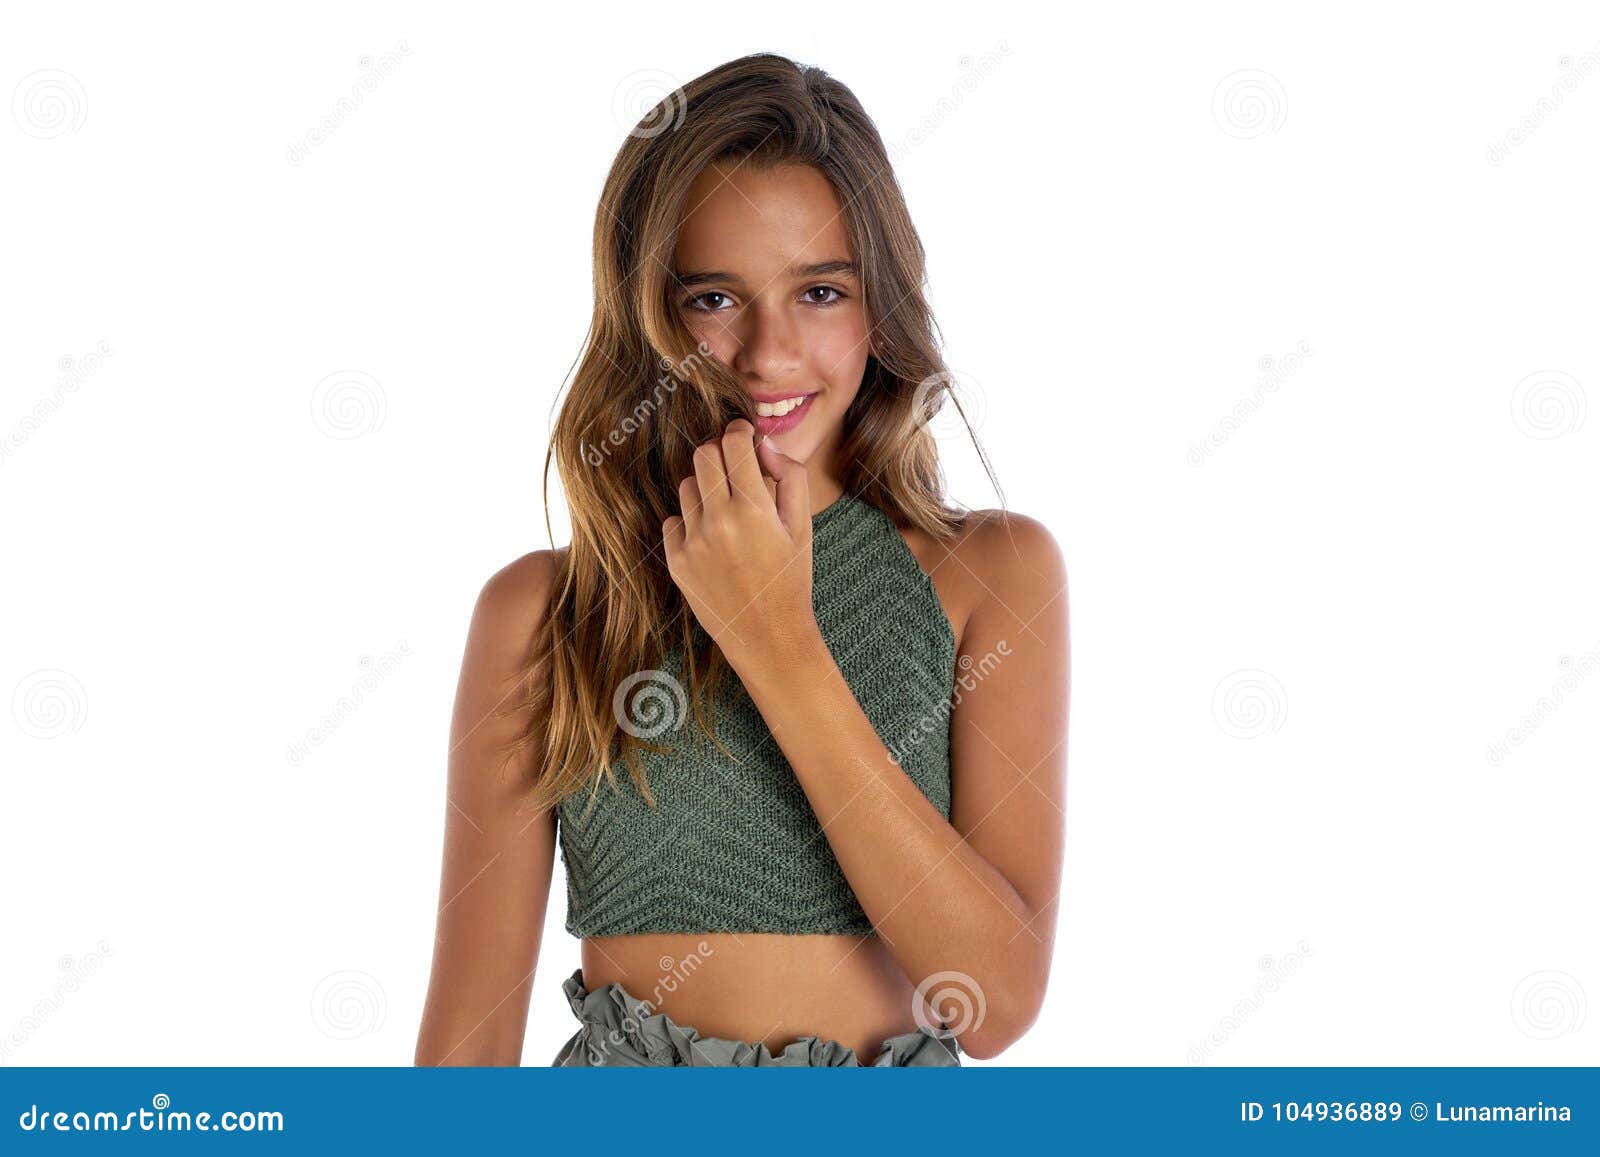 680 692 Teen Girl Photos Free Royalty Free Stock Photos From Dreamstime